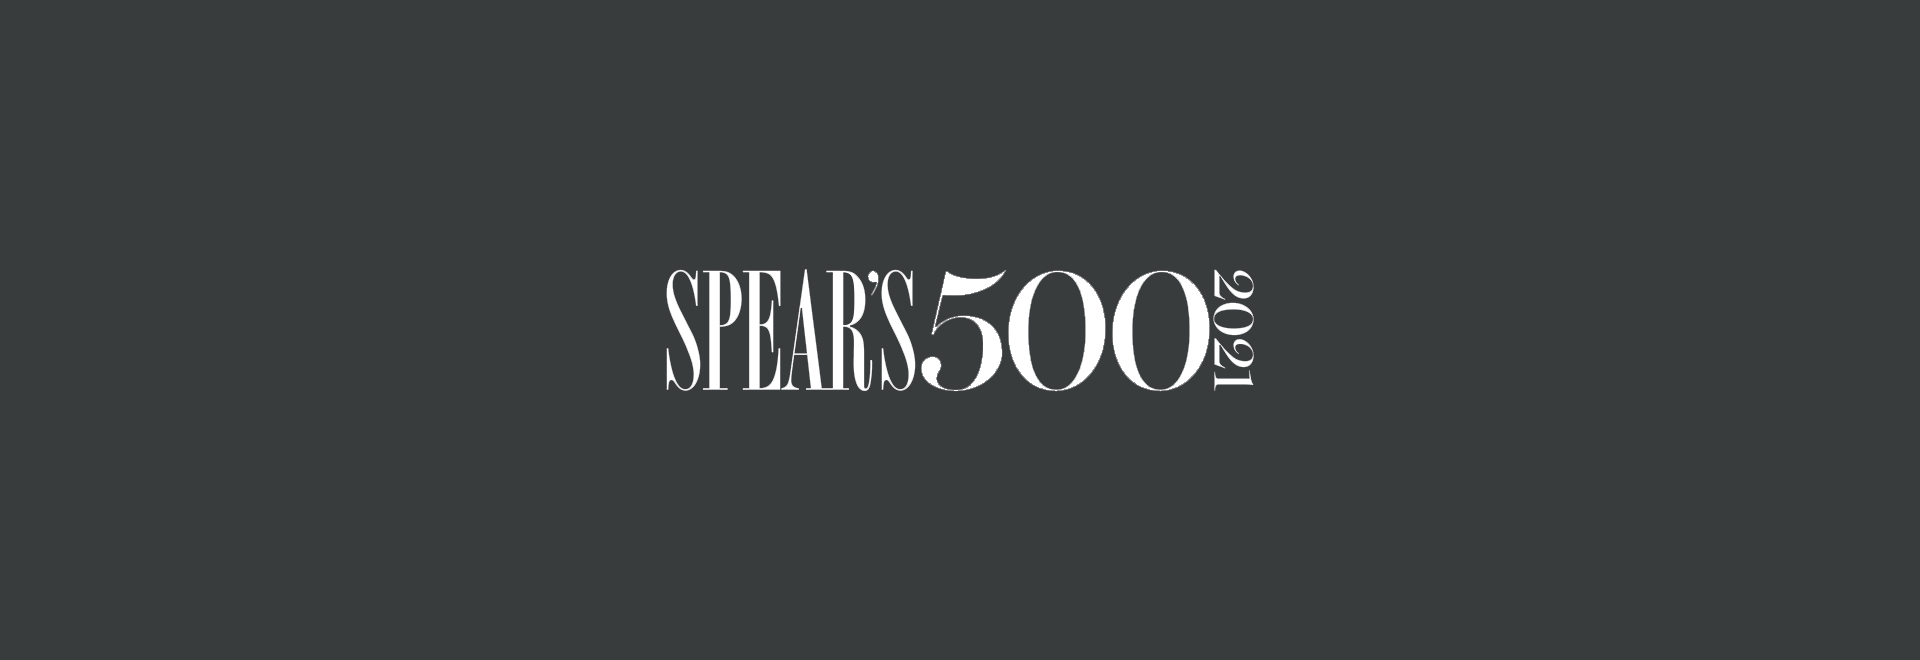 Accuro and representatives listed in SPEAR’s 500